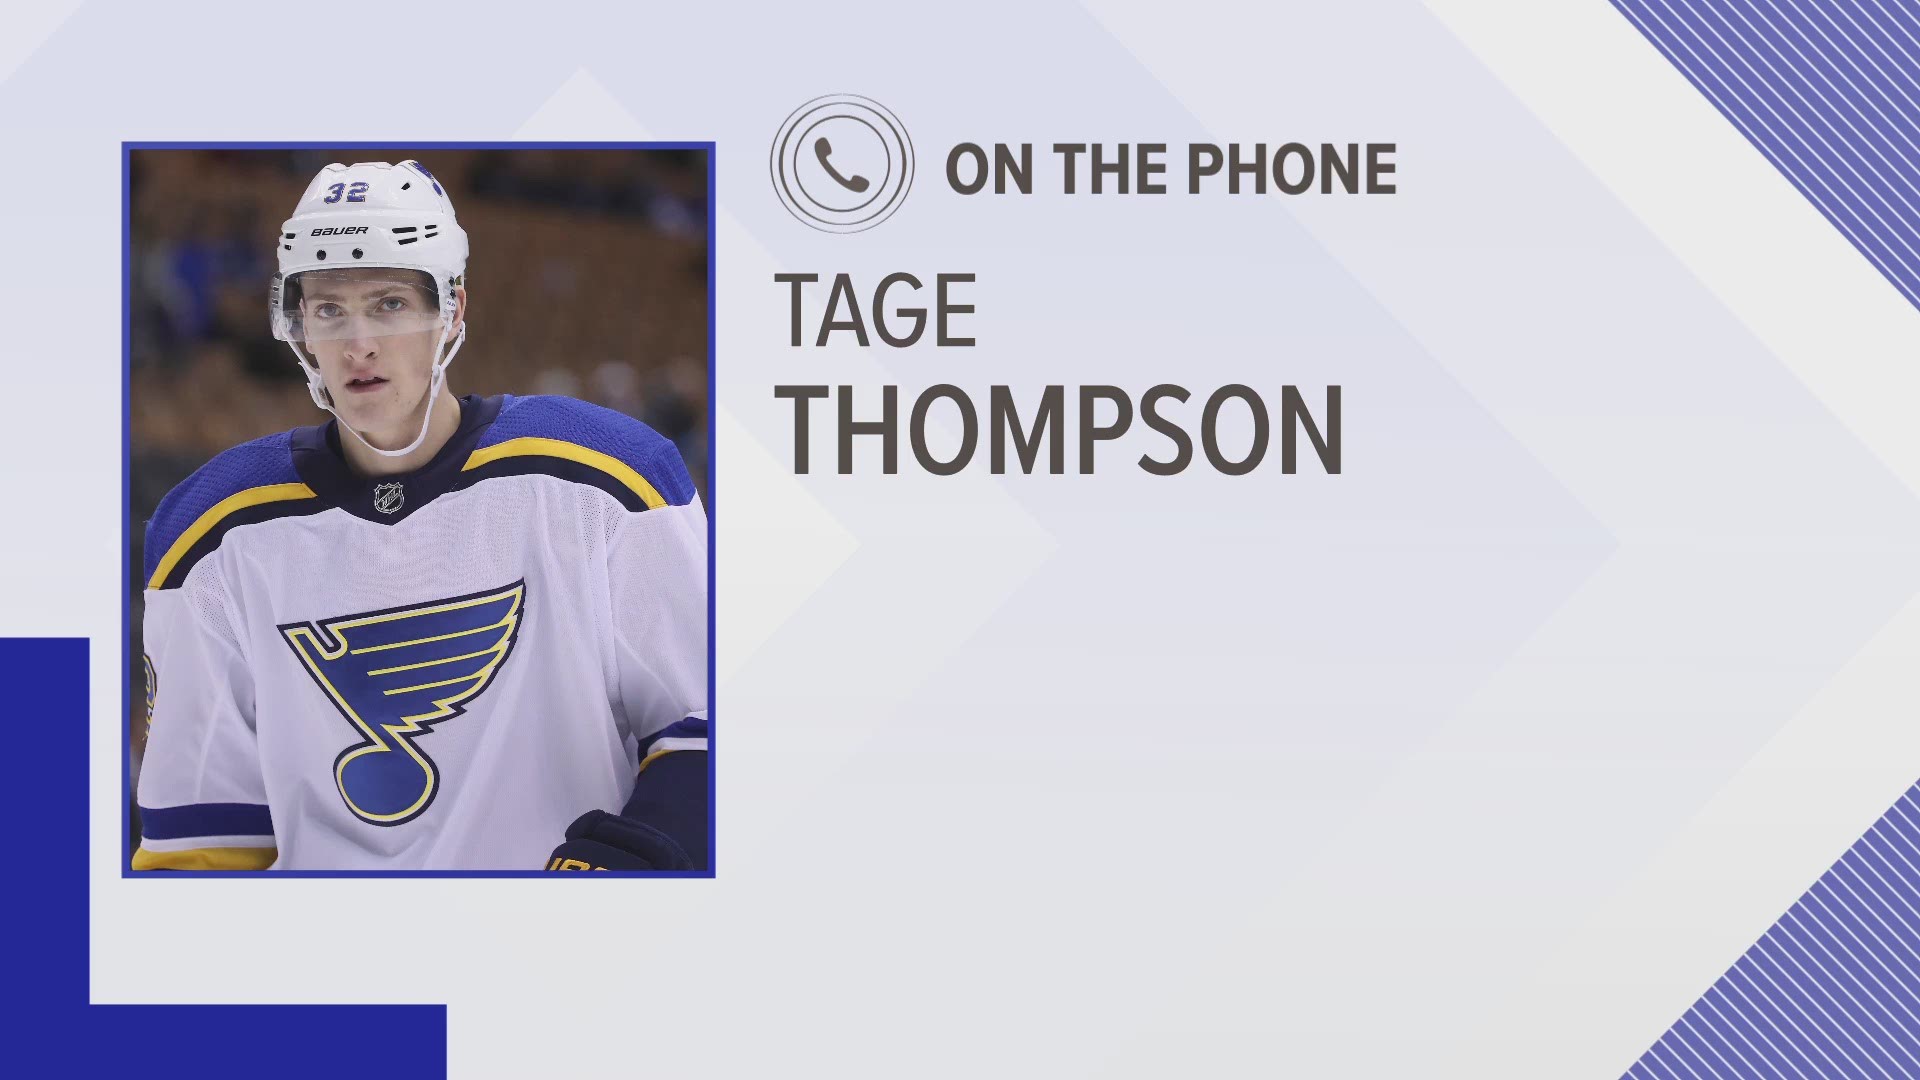 Tage Thompson hopes to earn more playing time with the Sabres than he did with the veteran laden St. Louis Blues.